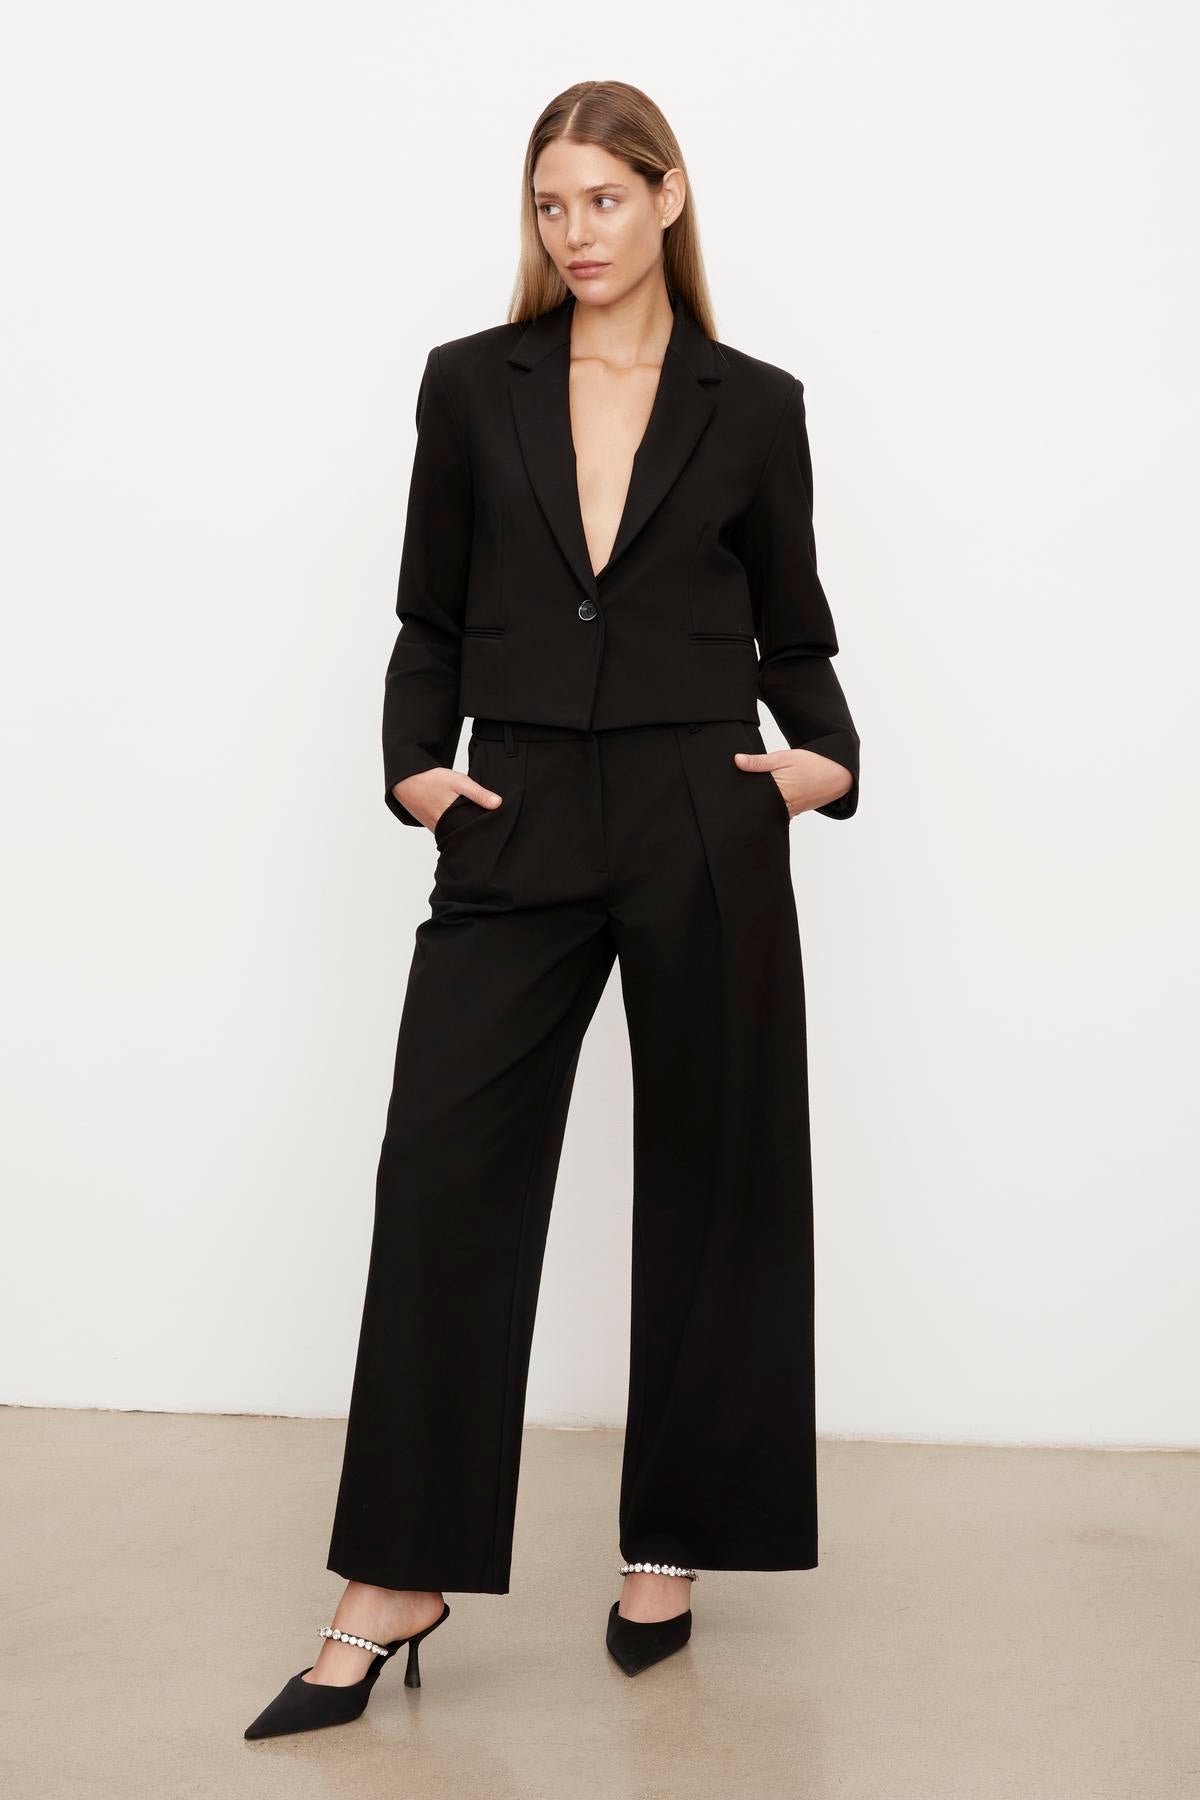 The model is wearing a black suit with an ANYA PONTI CROPPED BLAZER by Velvet by Graham & Spencer.-35655683571905